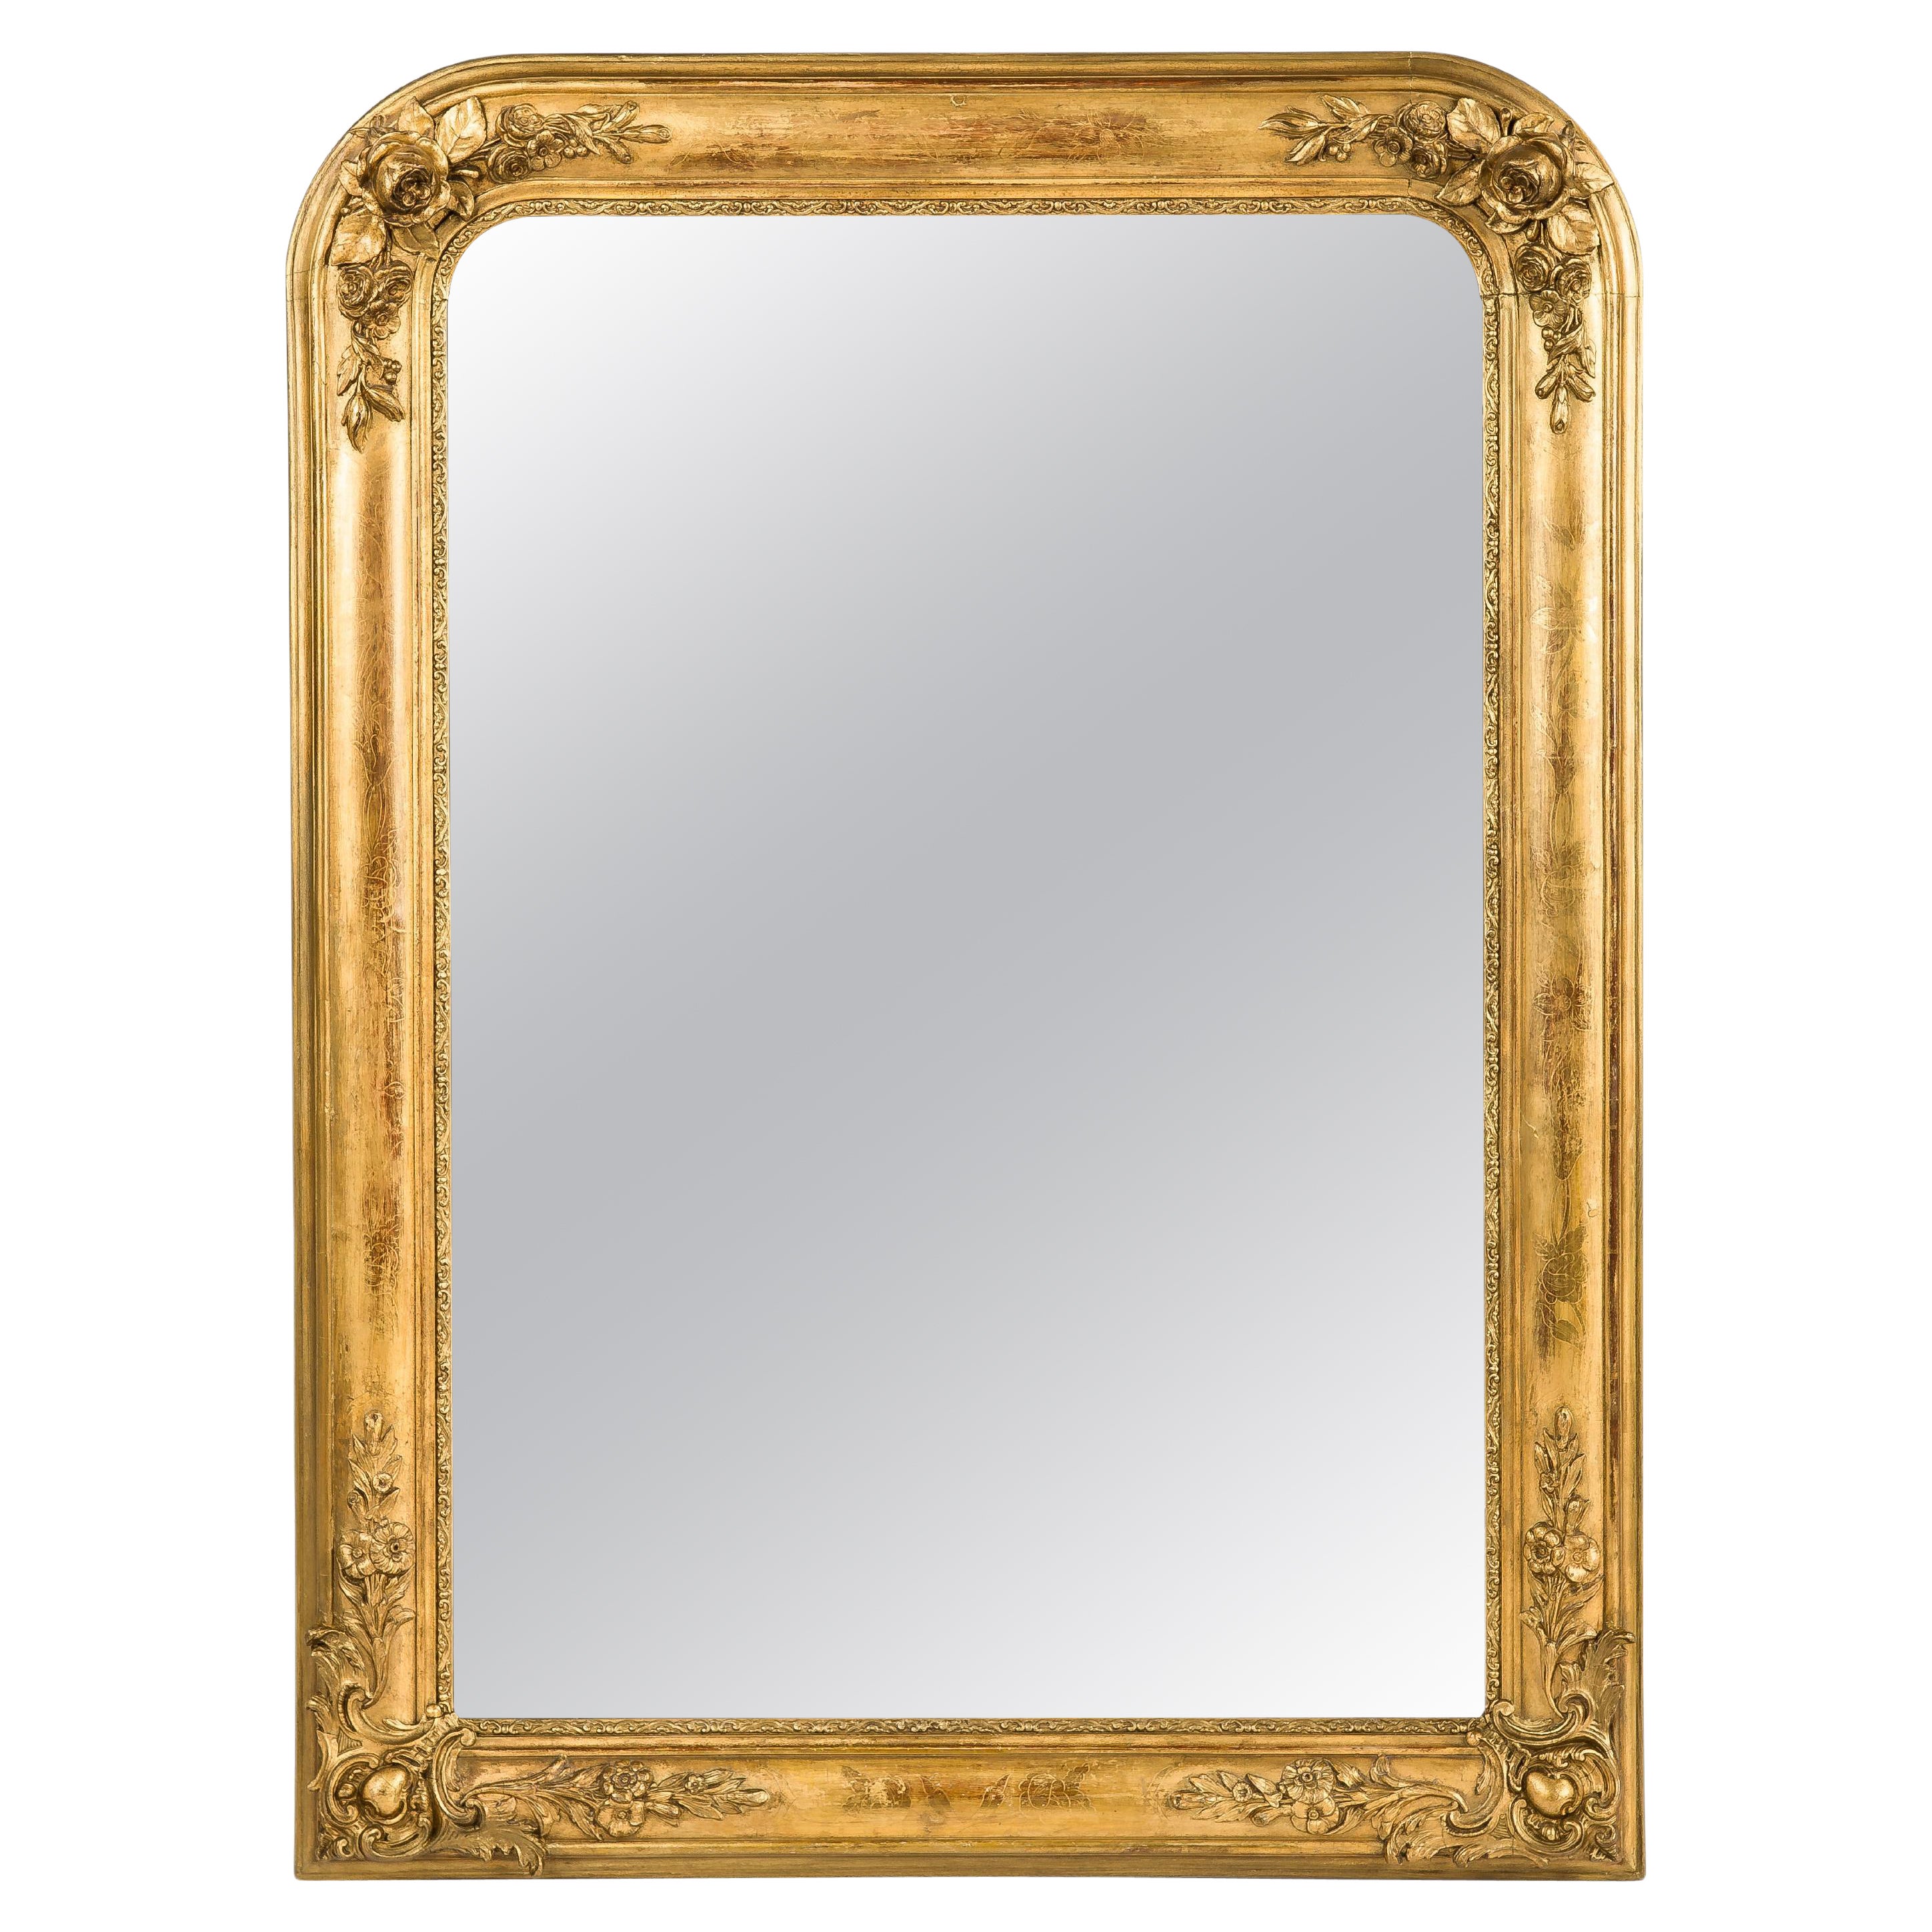 Antique 19th-Century Gold Leaf Gilt French Louis Philippe Mirror